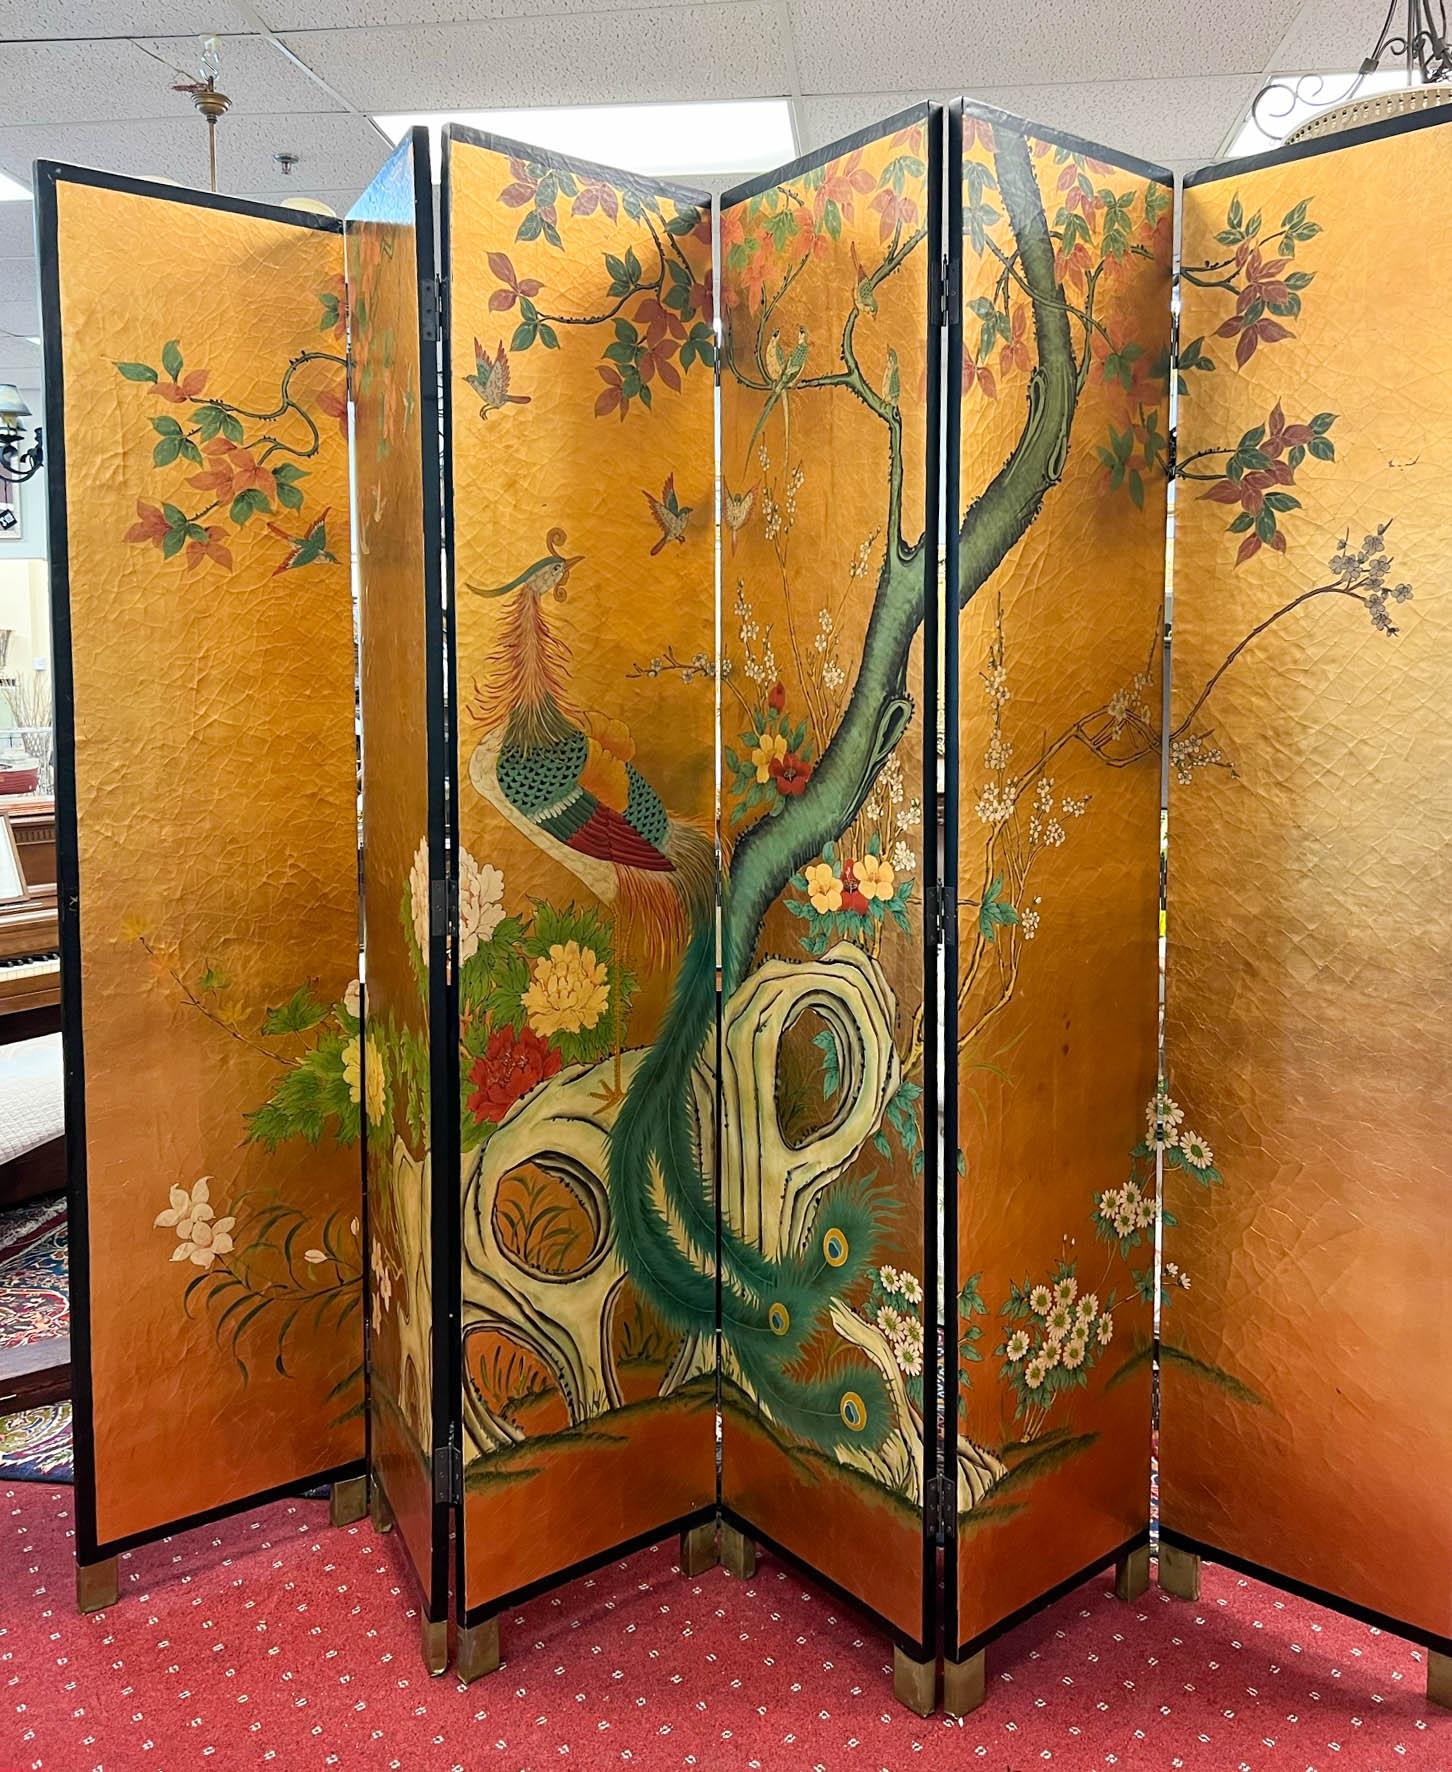 Vintage 7 Ft 6-Panel Asian Folding Screen/Room Divider In Good Condition For Sale In Palm Beach Gardens, FL